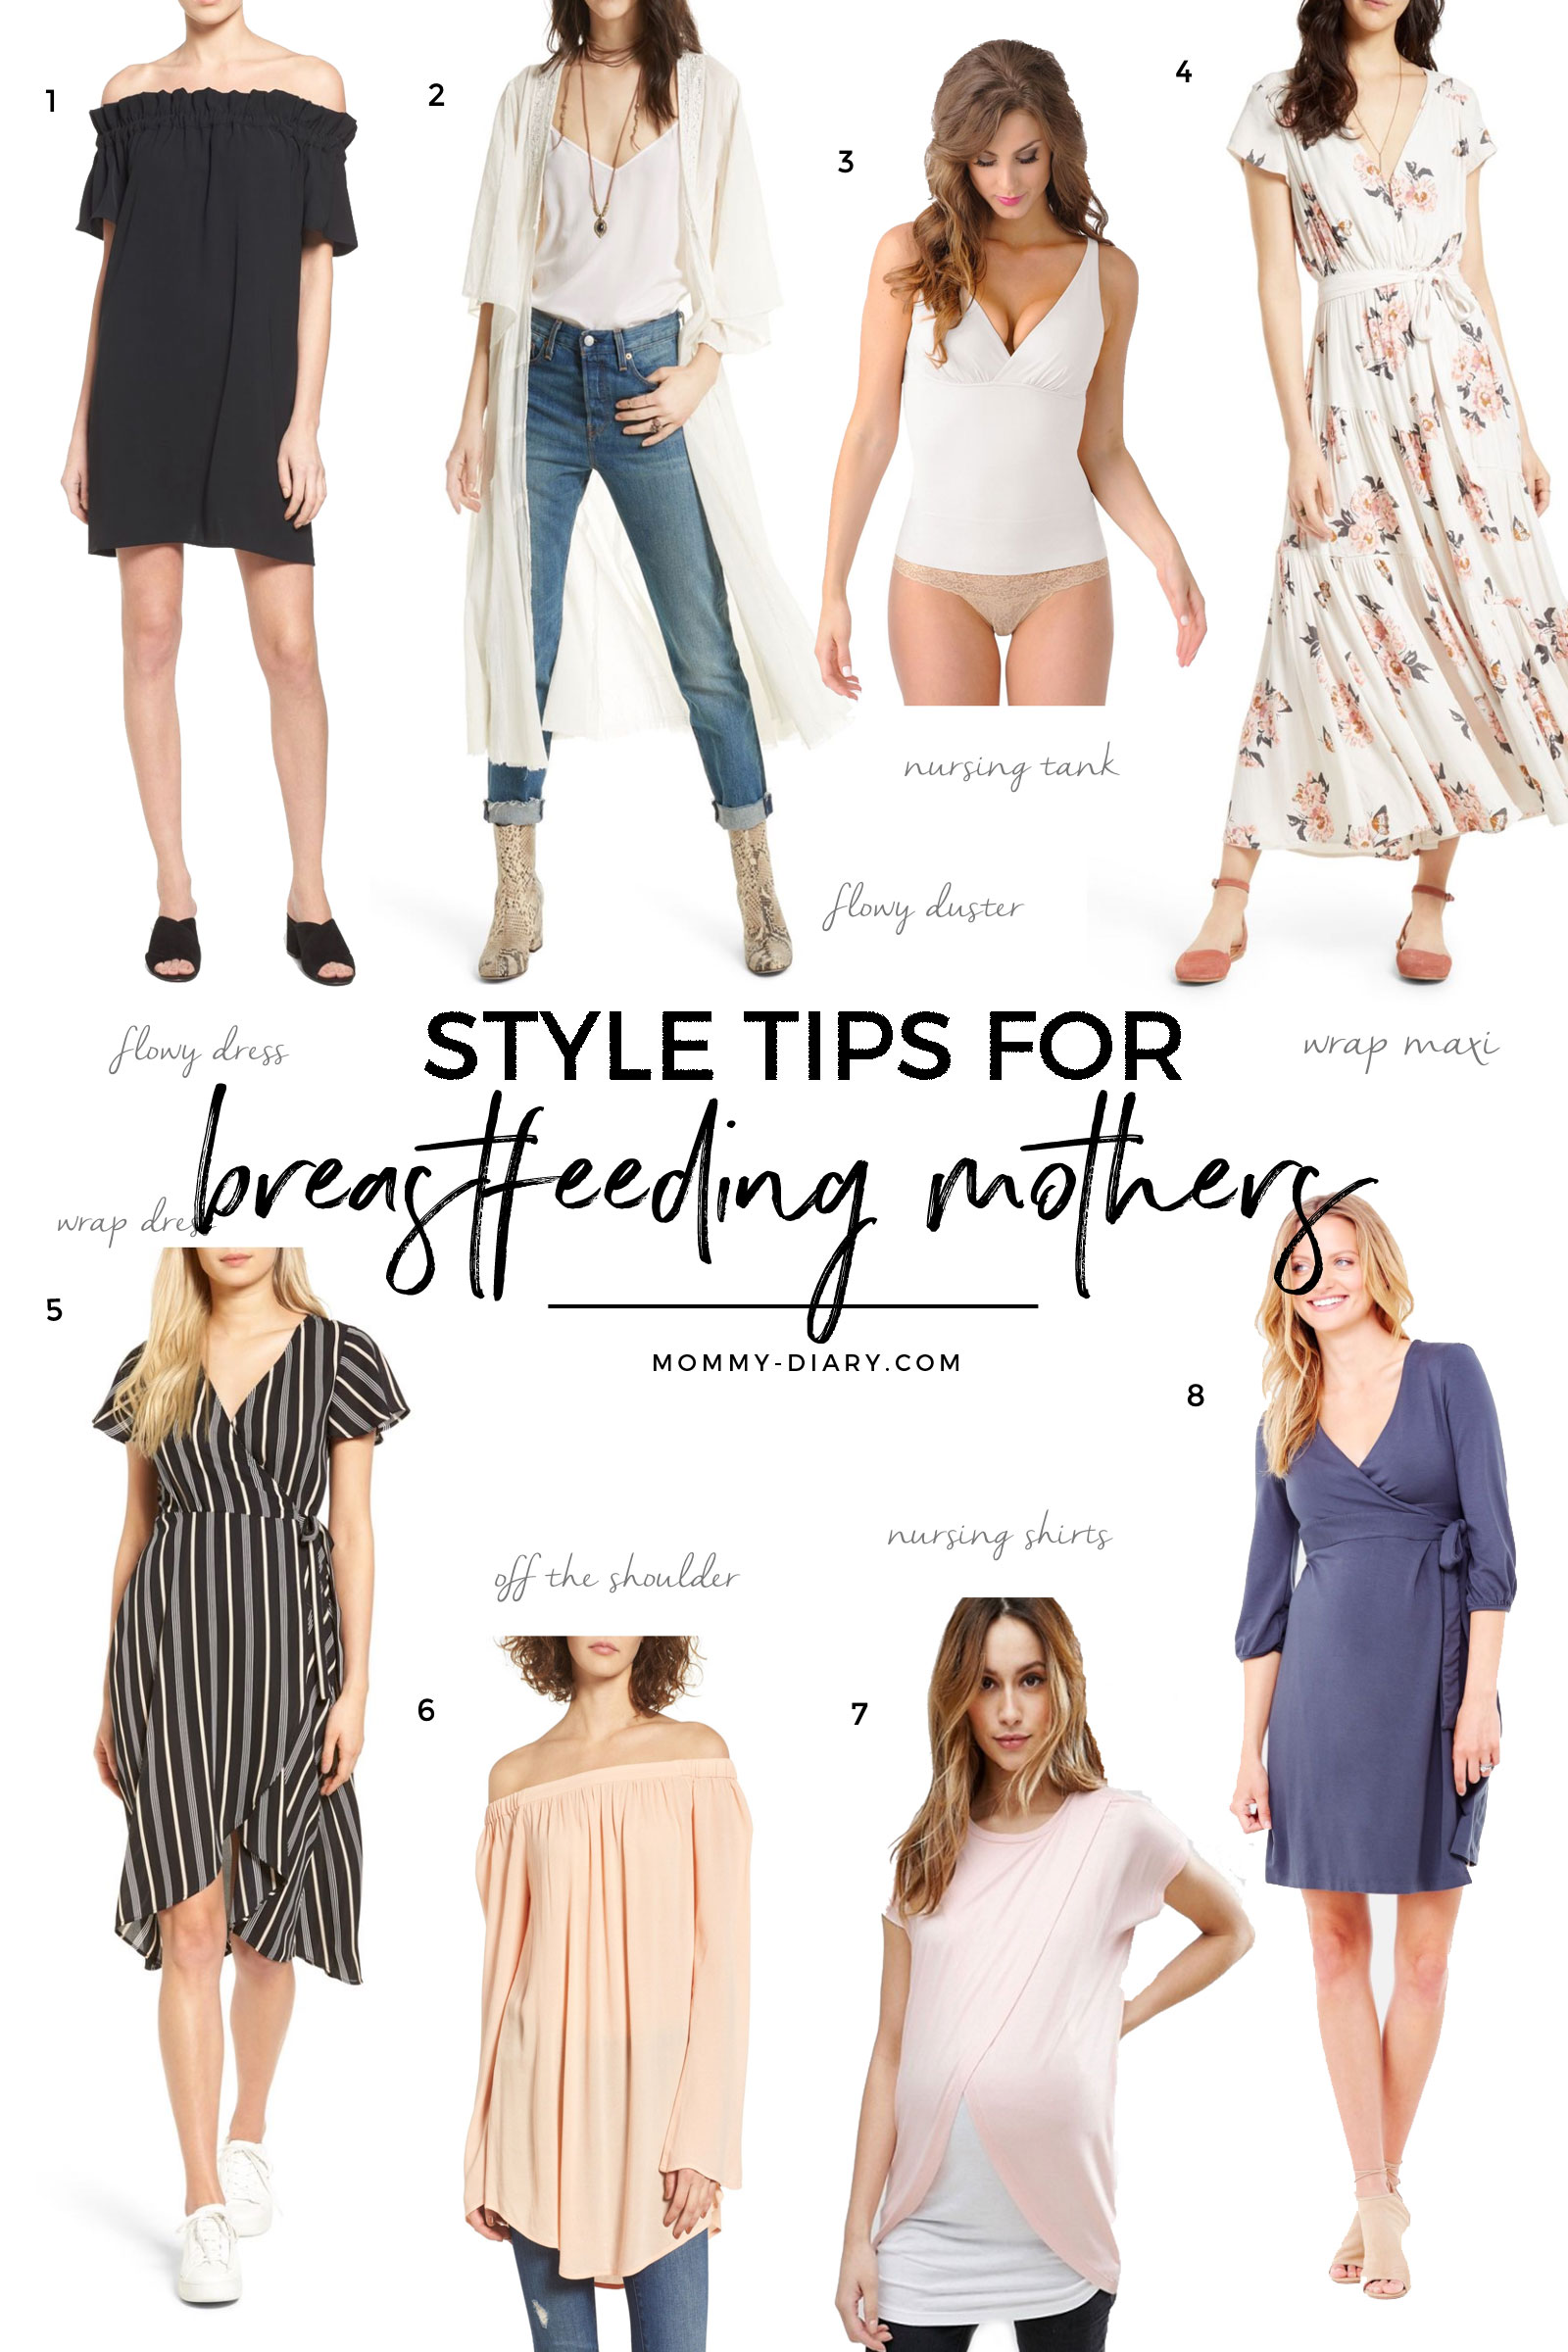 How to Find Inexpensive Nursing Clothing  Nursing clothes, Breastfeeding  clothes, Breastfeeding fashion